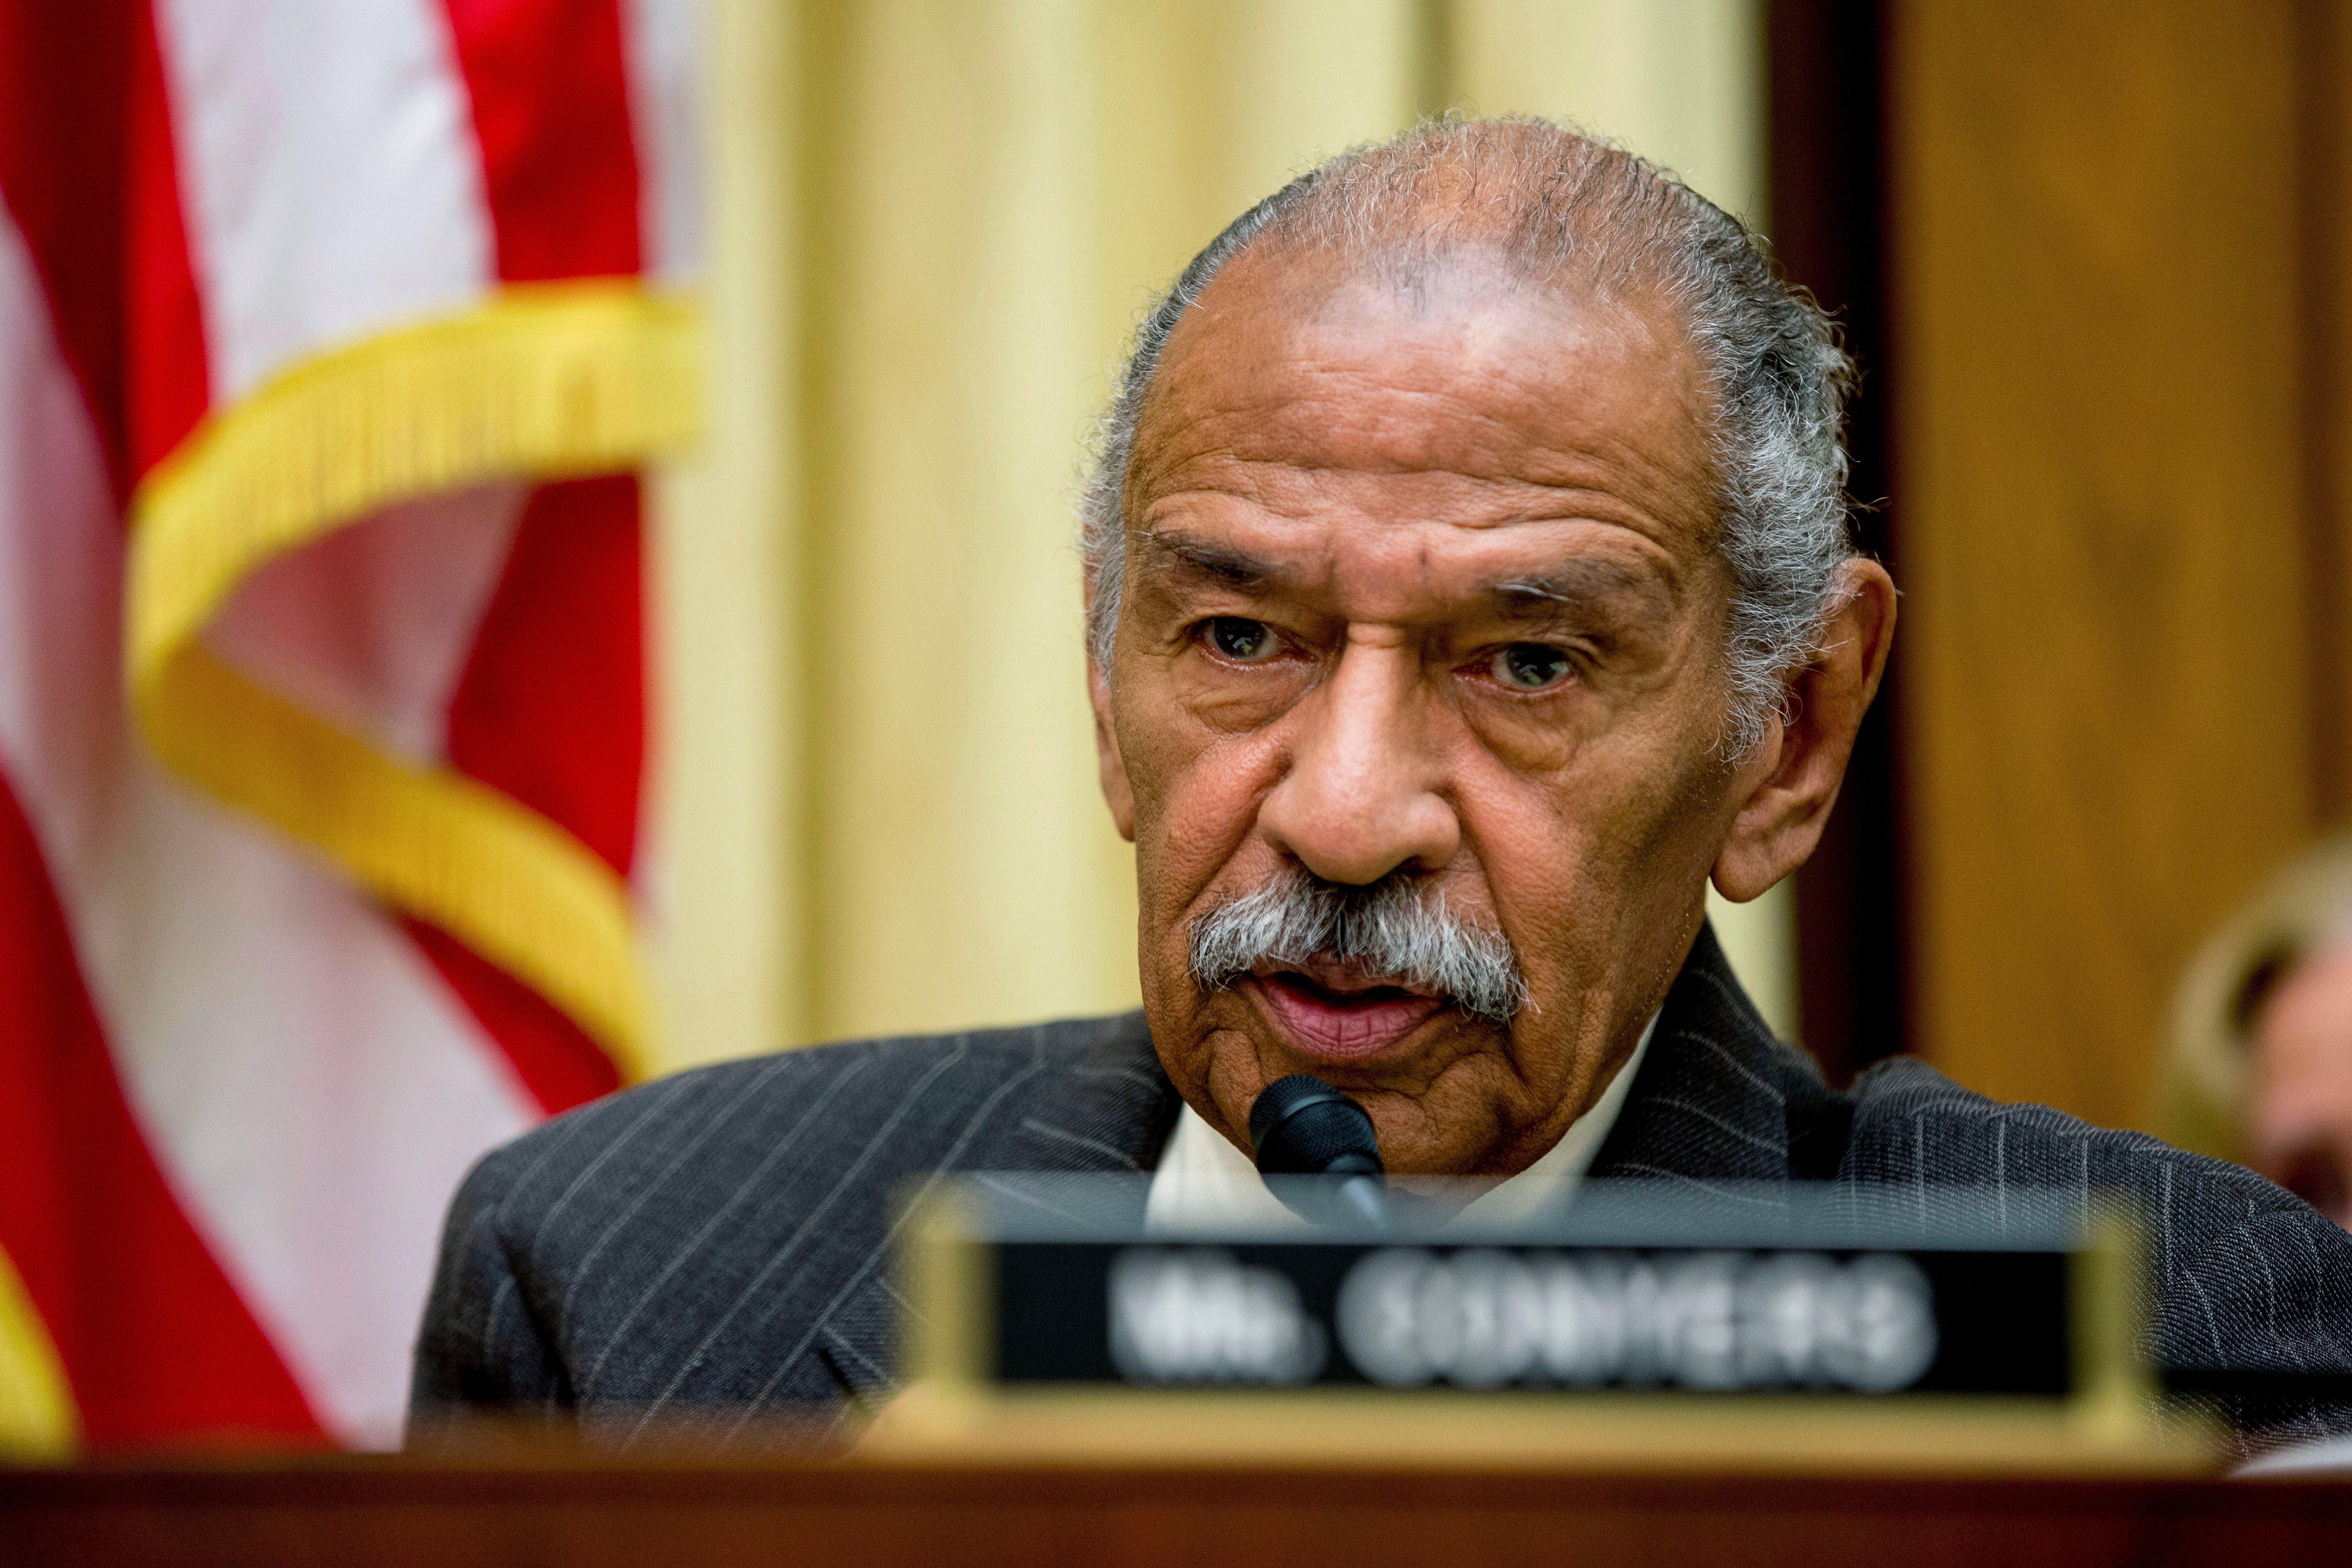 Allegations Mount Against John Conyers As He Readies For Radio Address